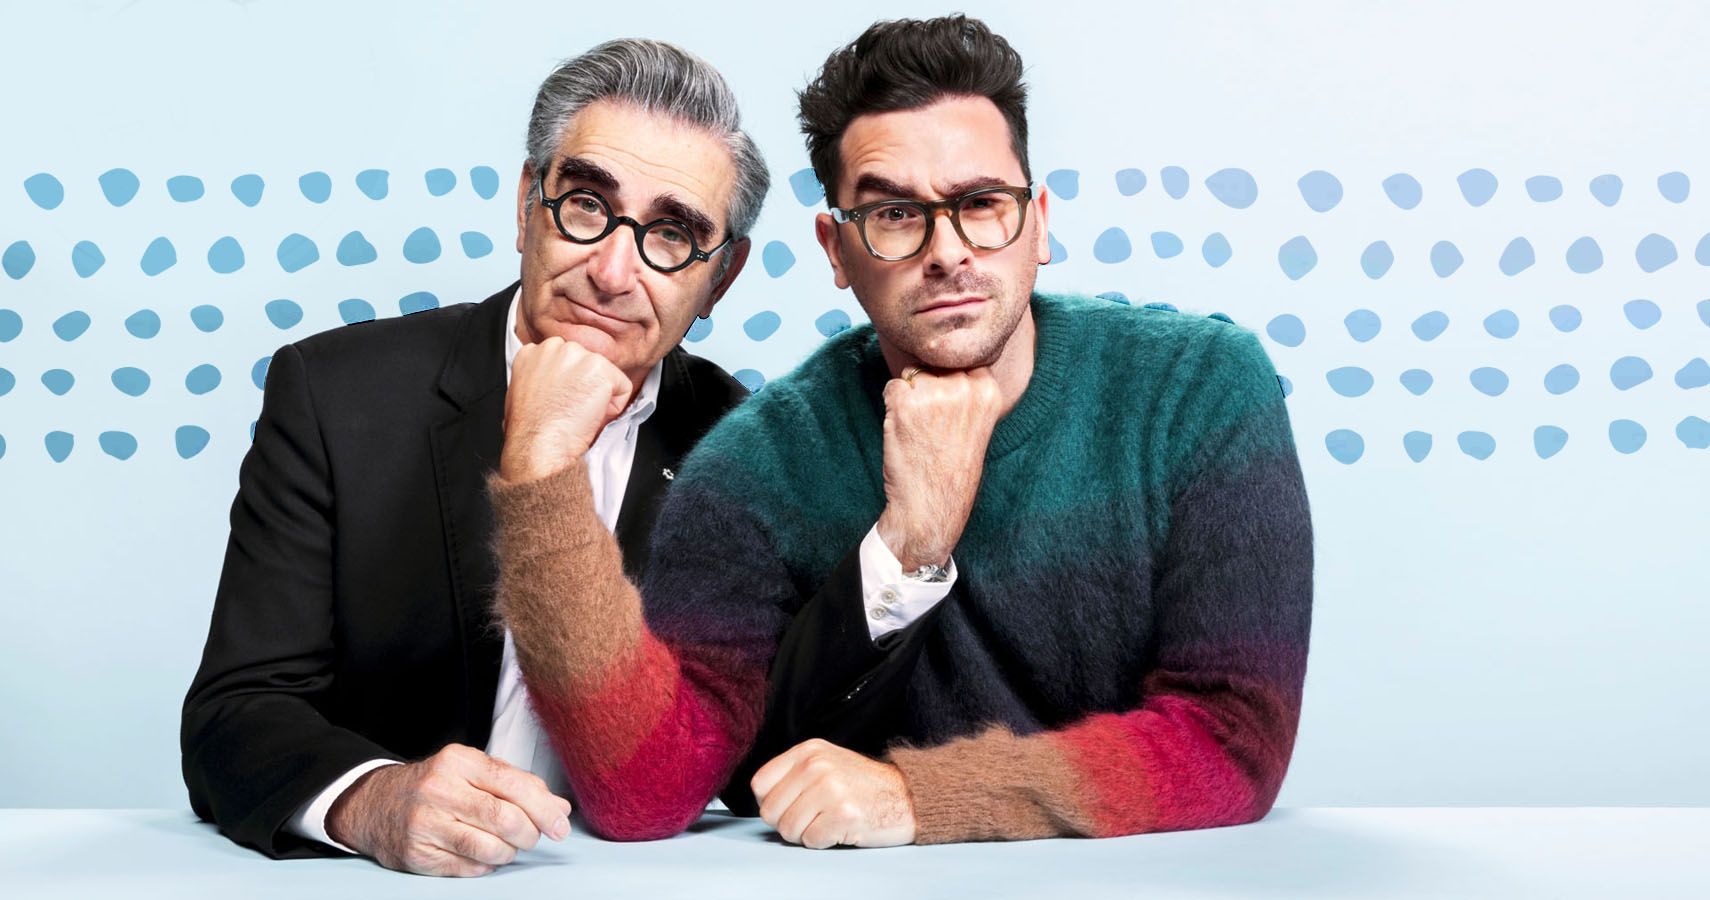 Dan Levy Wishes Every Dad Gave Their Son The Support He Got From His Dad